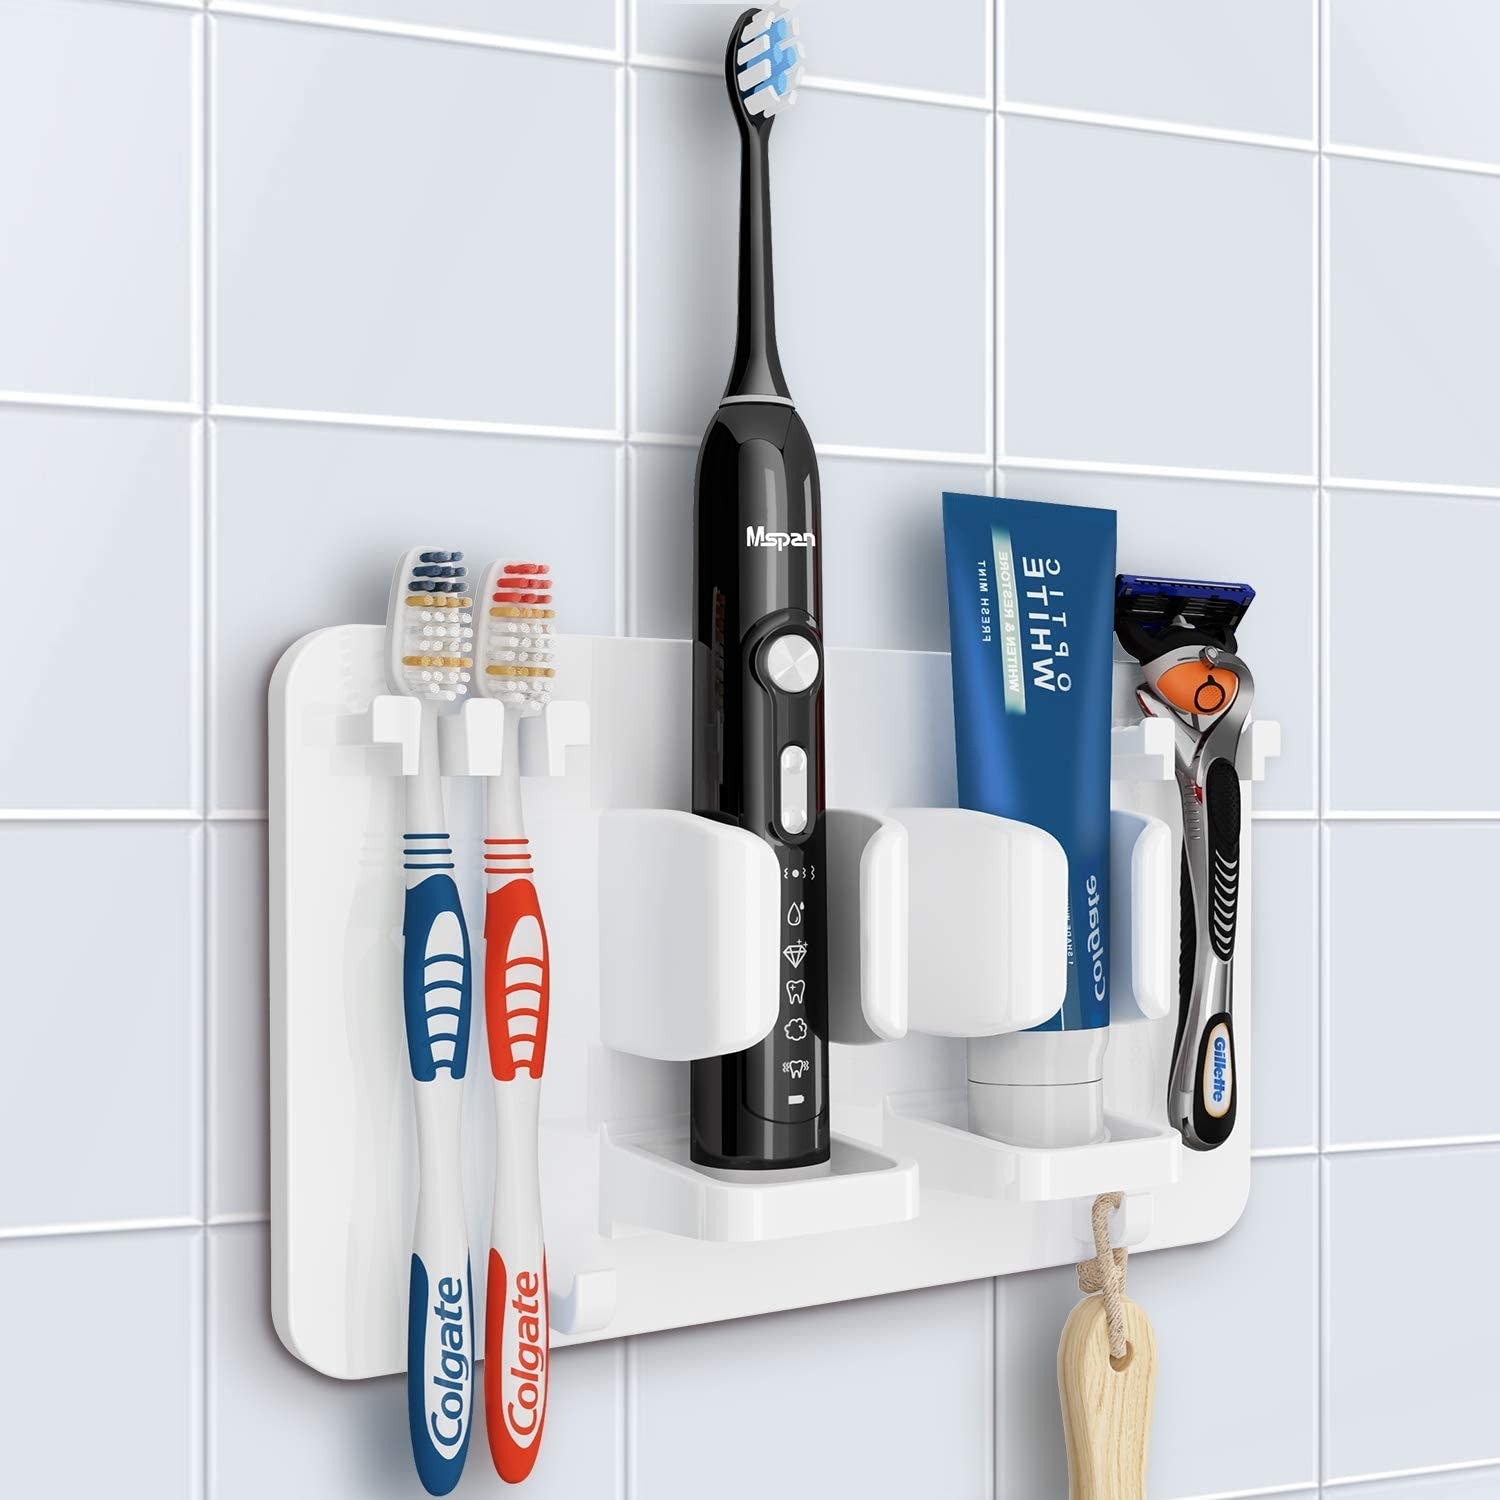 Several bathroom accessories in the toothbrush station